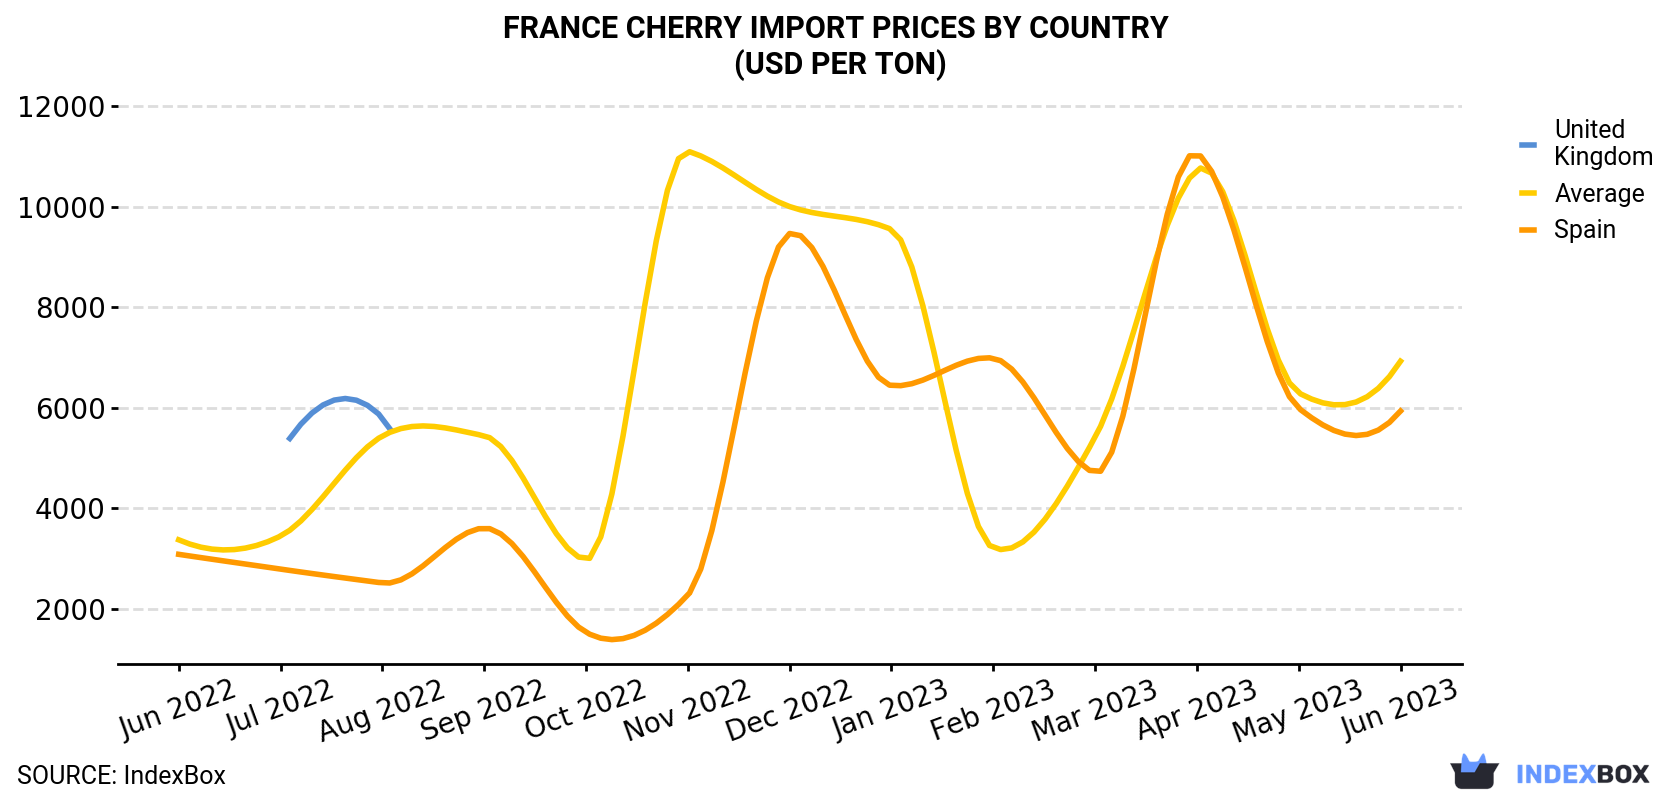 France Cherry Import Prices By Country (USD Per Ton)